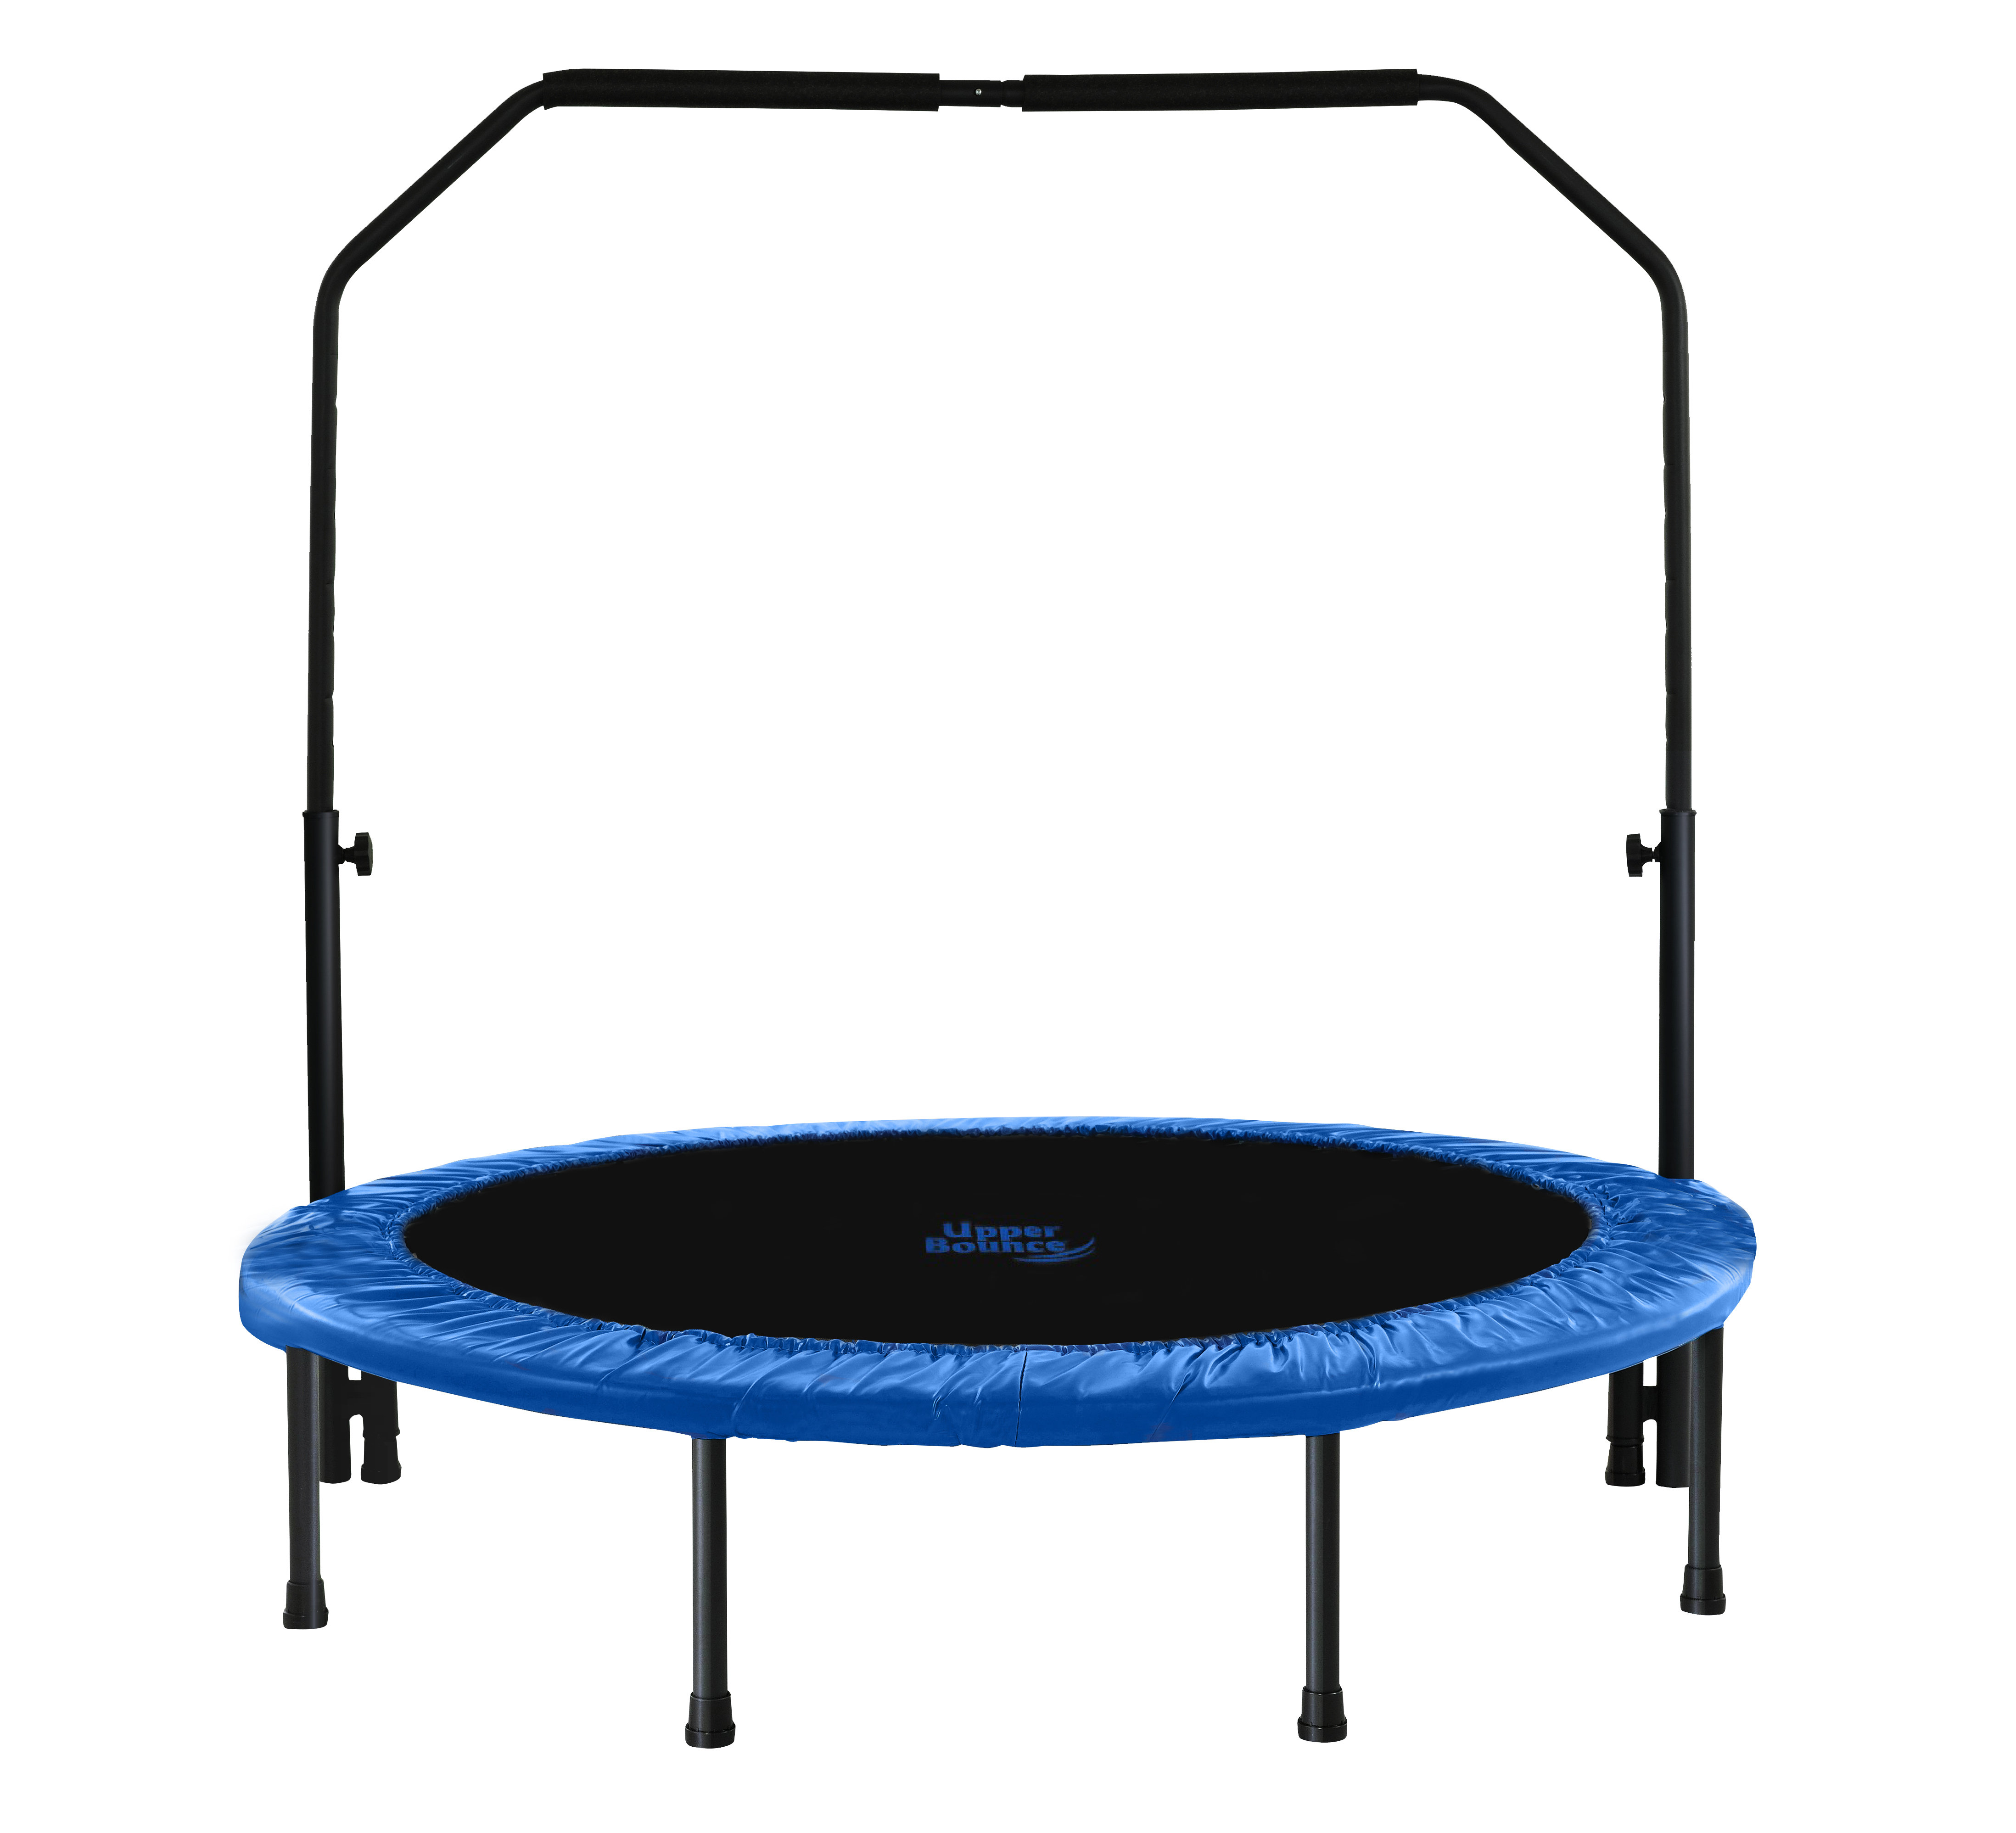 5 Profound Health Benefits of Trampoline Jumping (Updated)